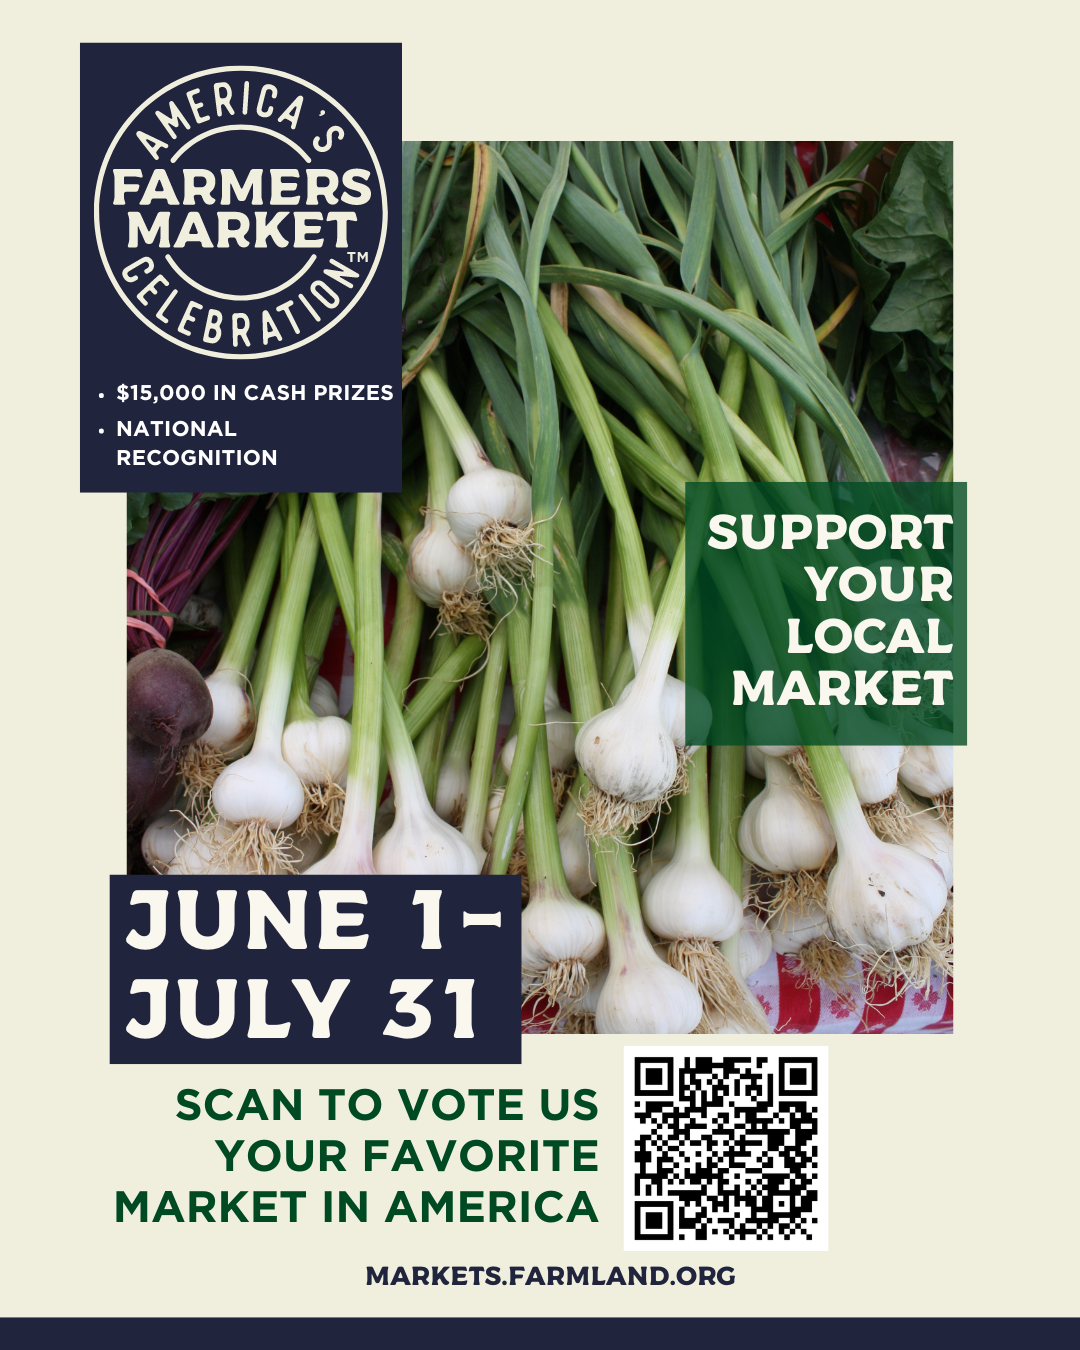 Vote for us as your Favorite Farmers Market!